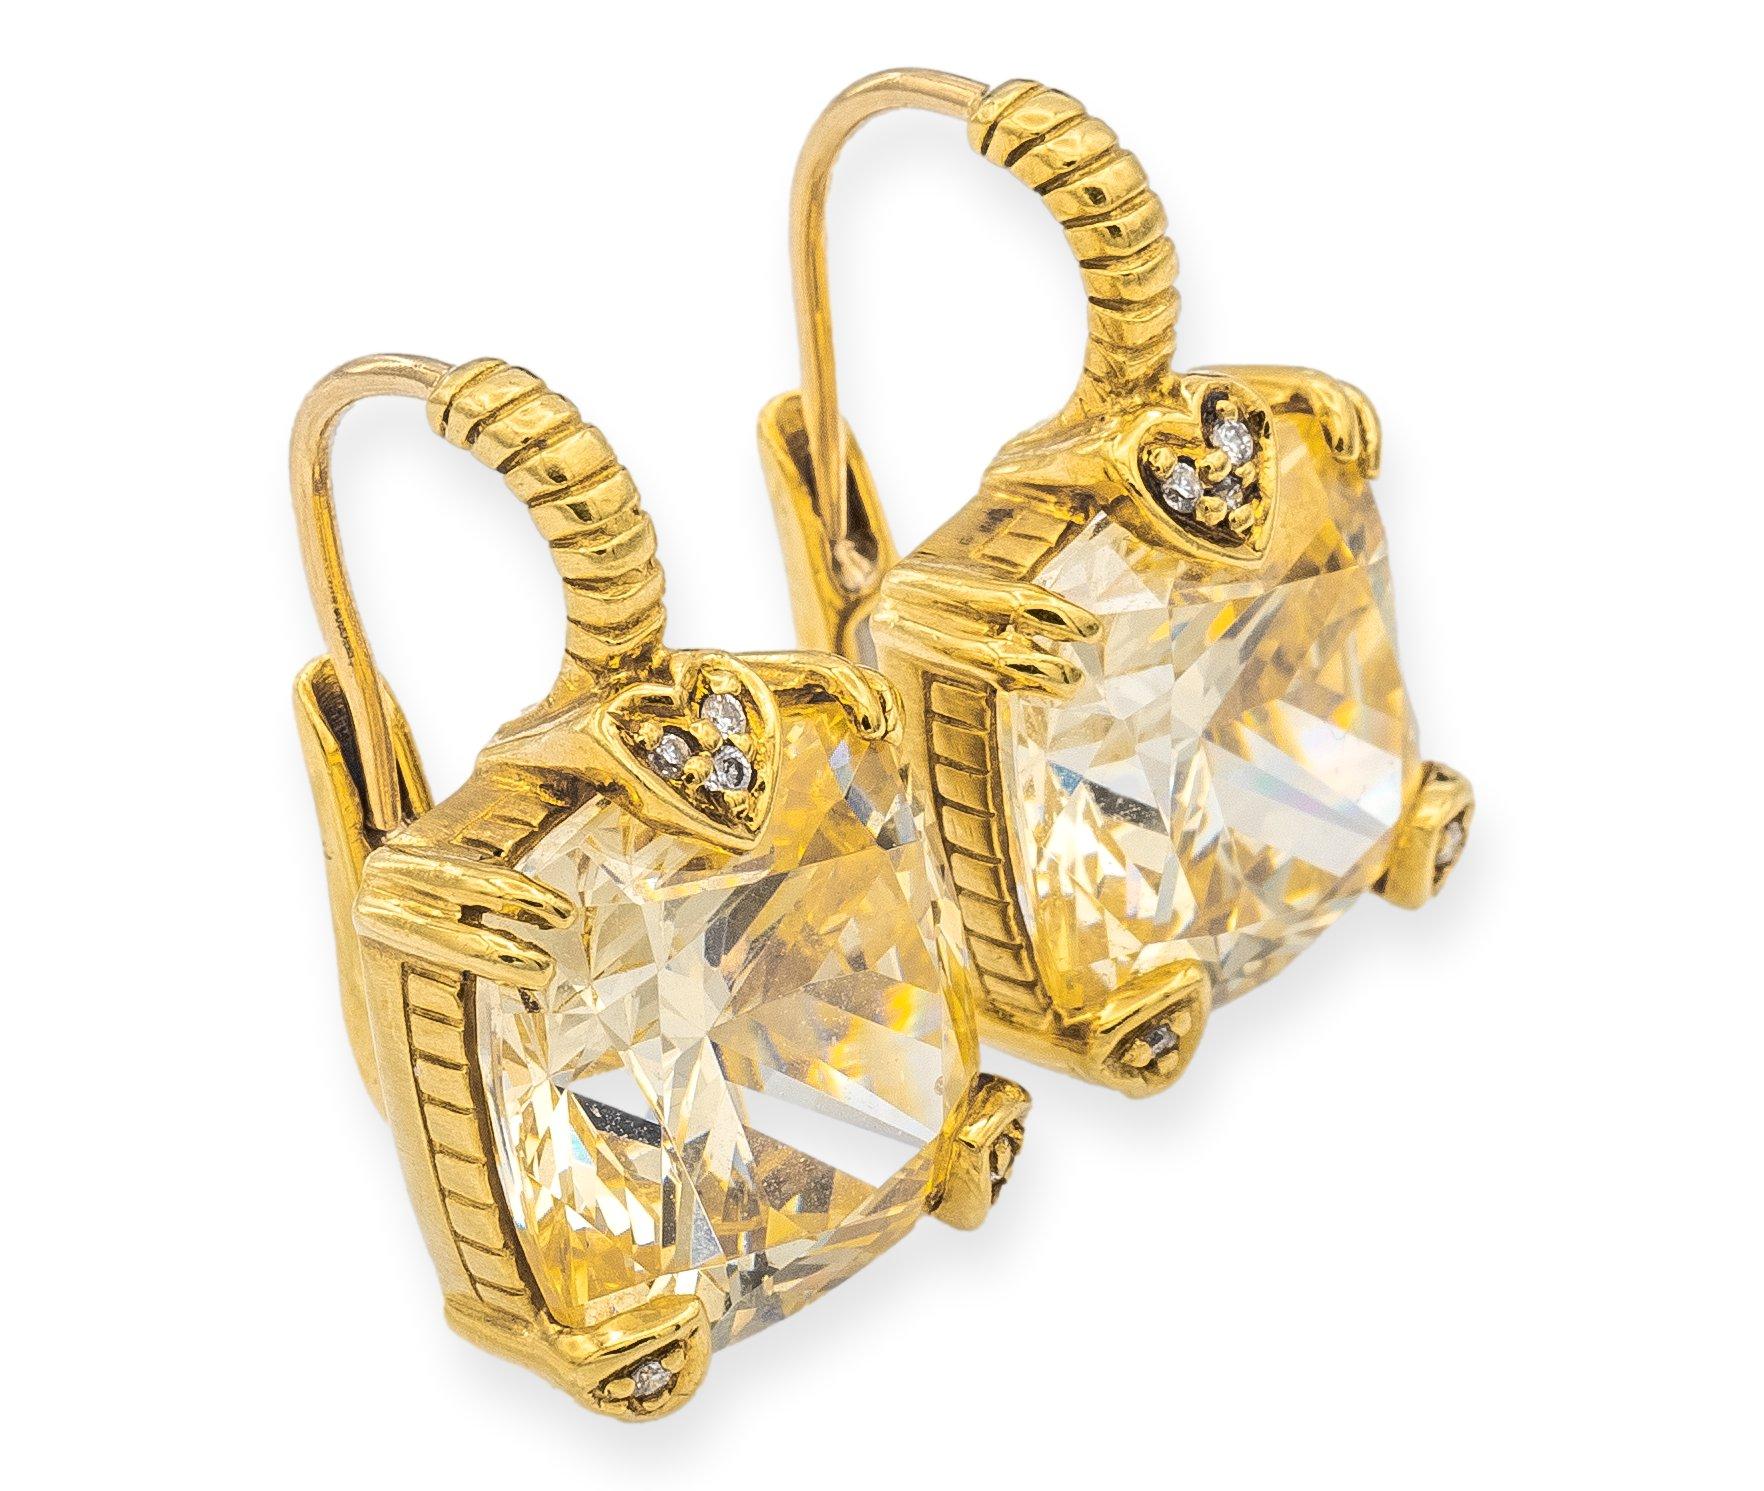 Judith Ripka Vintage Lever-Back style earrings are a classic and elegant choice. The earrings are finely crafted in 18 karat yellow gold. The earrings are adorned with 2 stunning cushion-shaped lemon quartz gemstone that exude a warm, sunny glow.